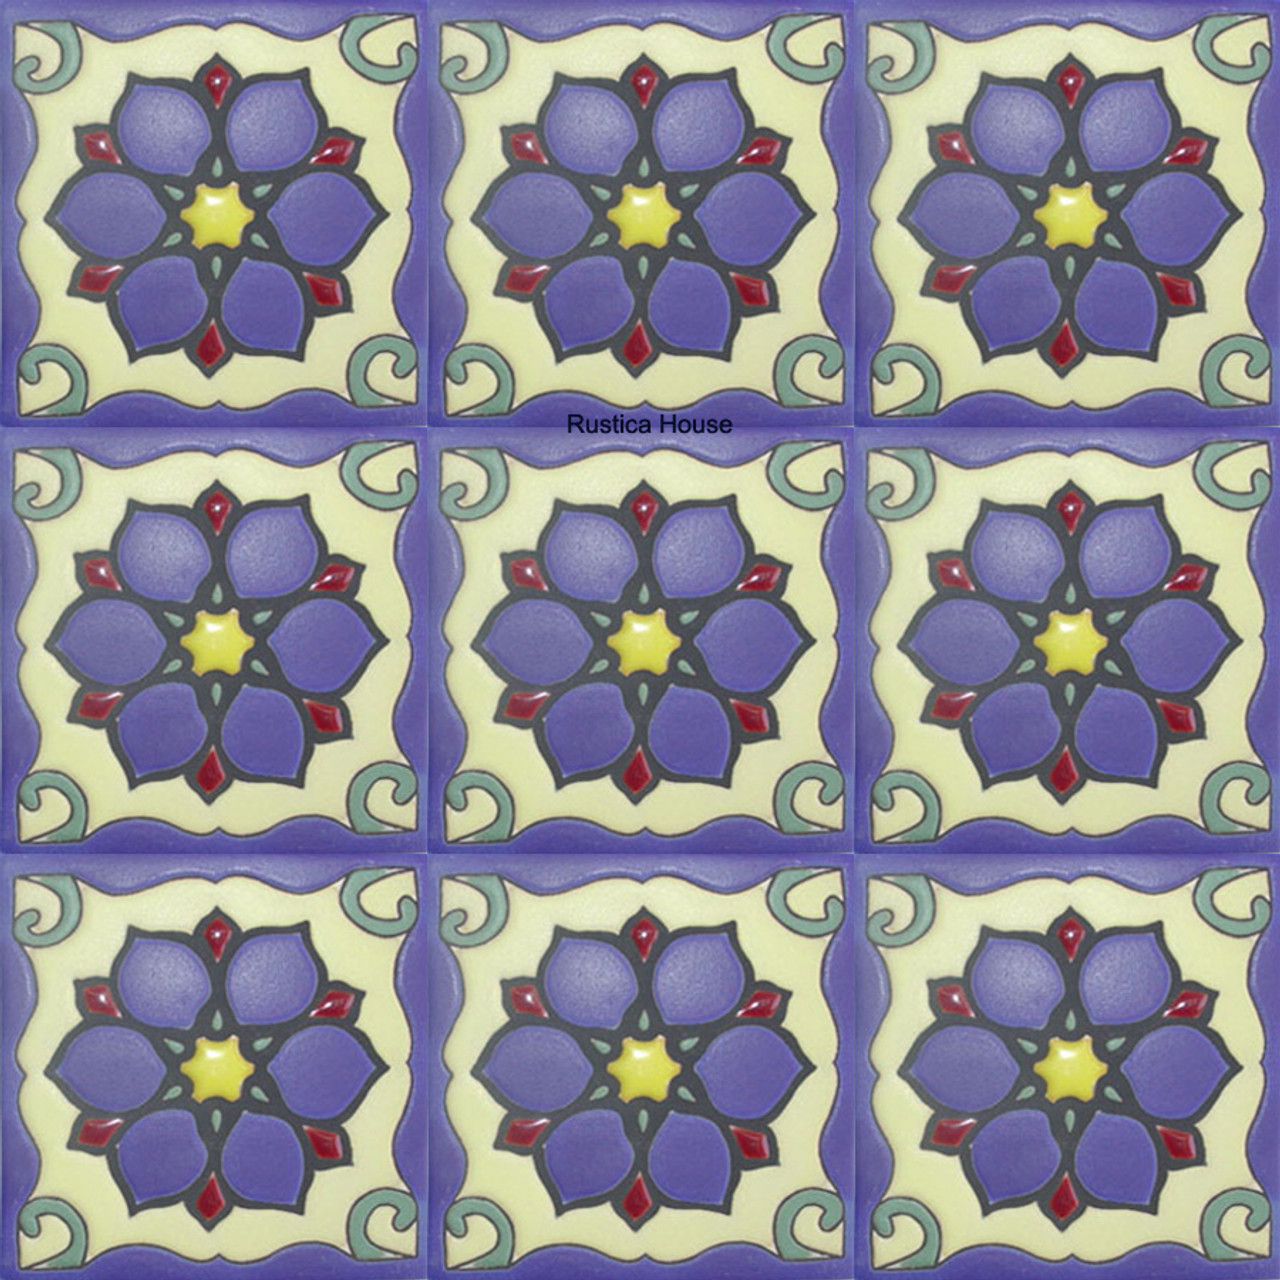 high relief tiles paintes purple blue, red, light yellow and white